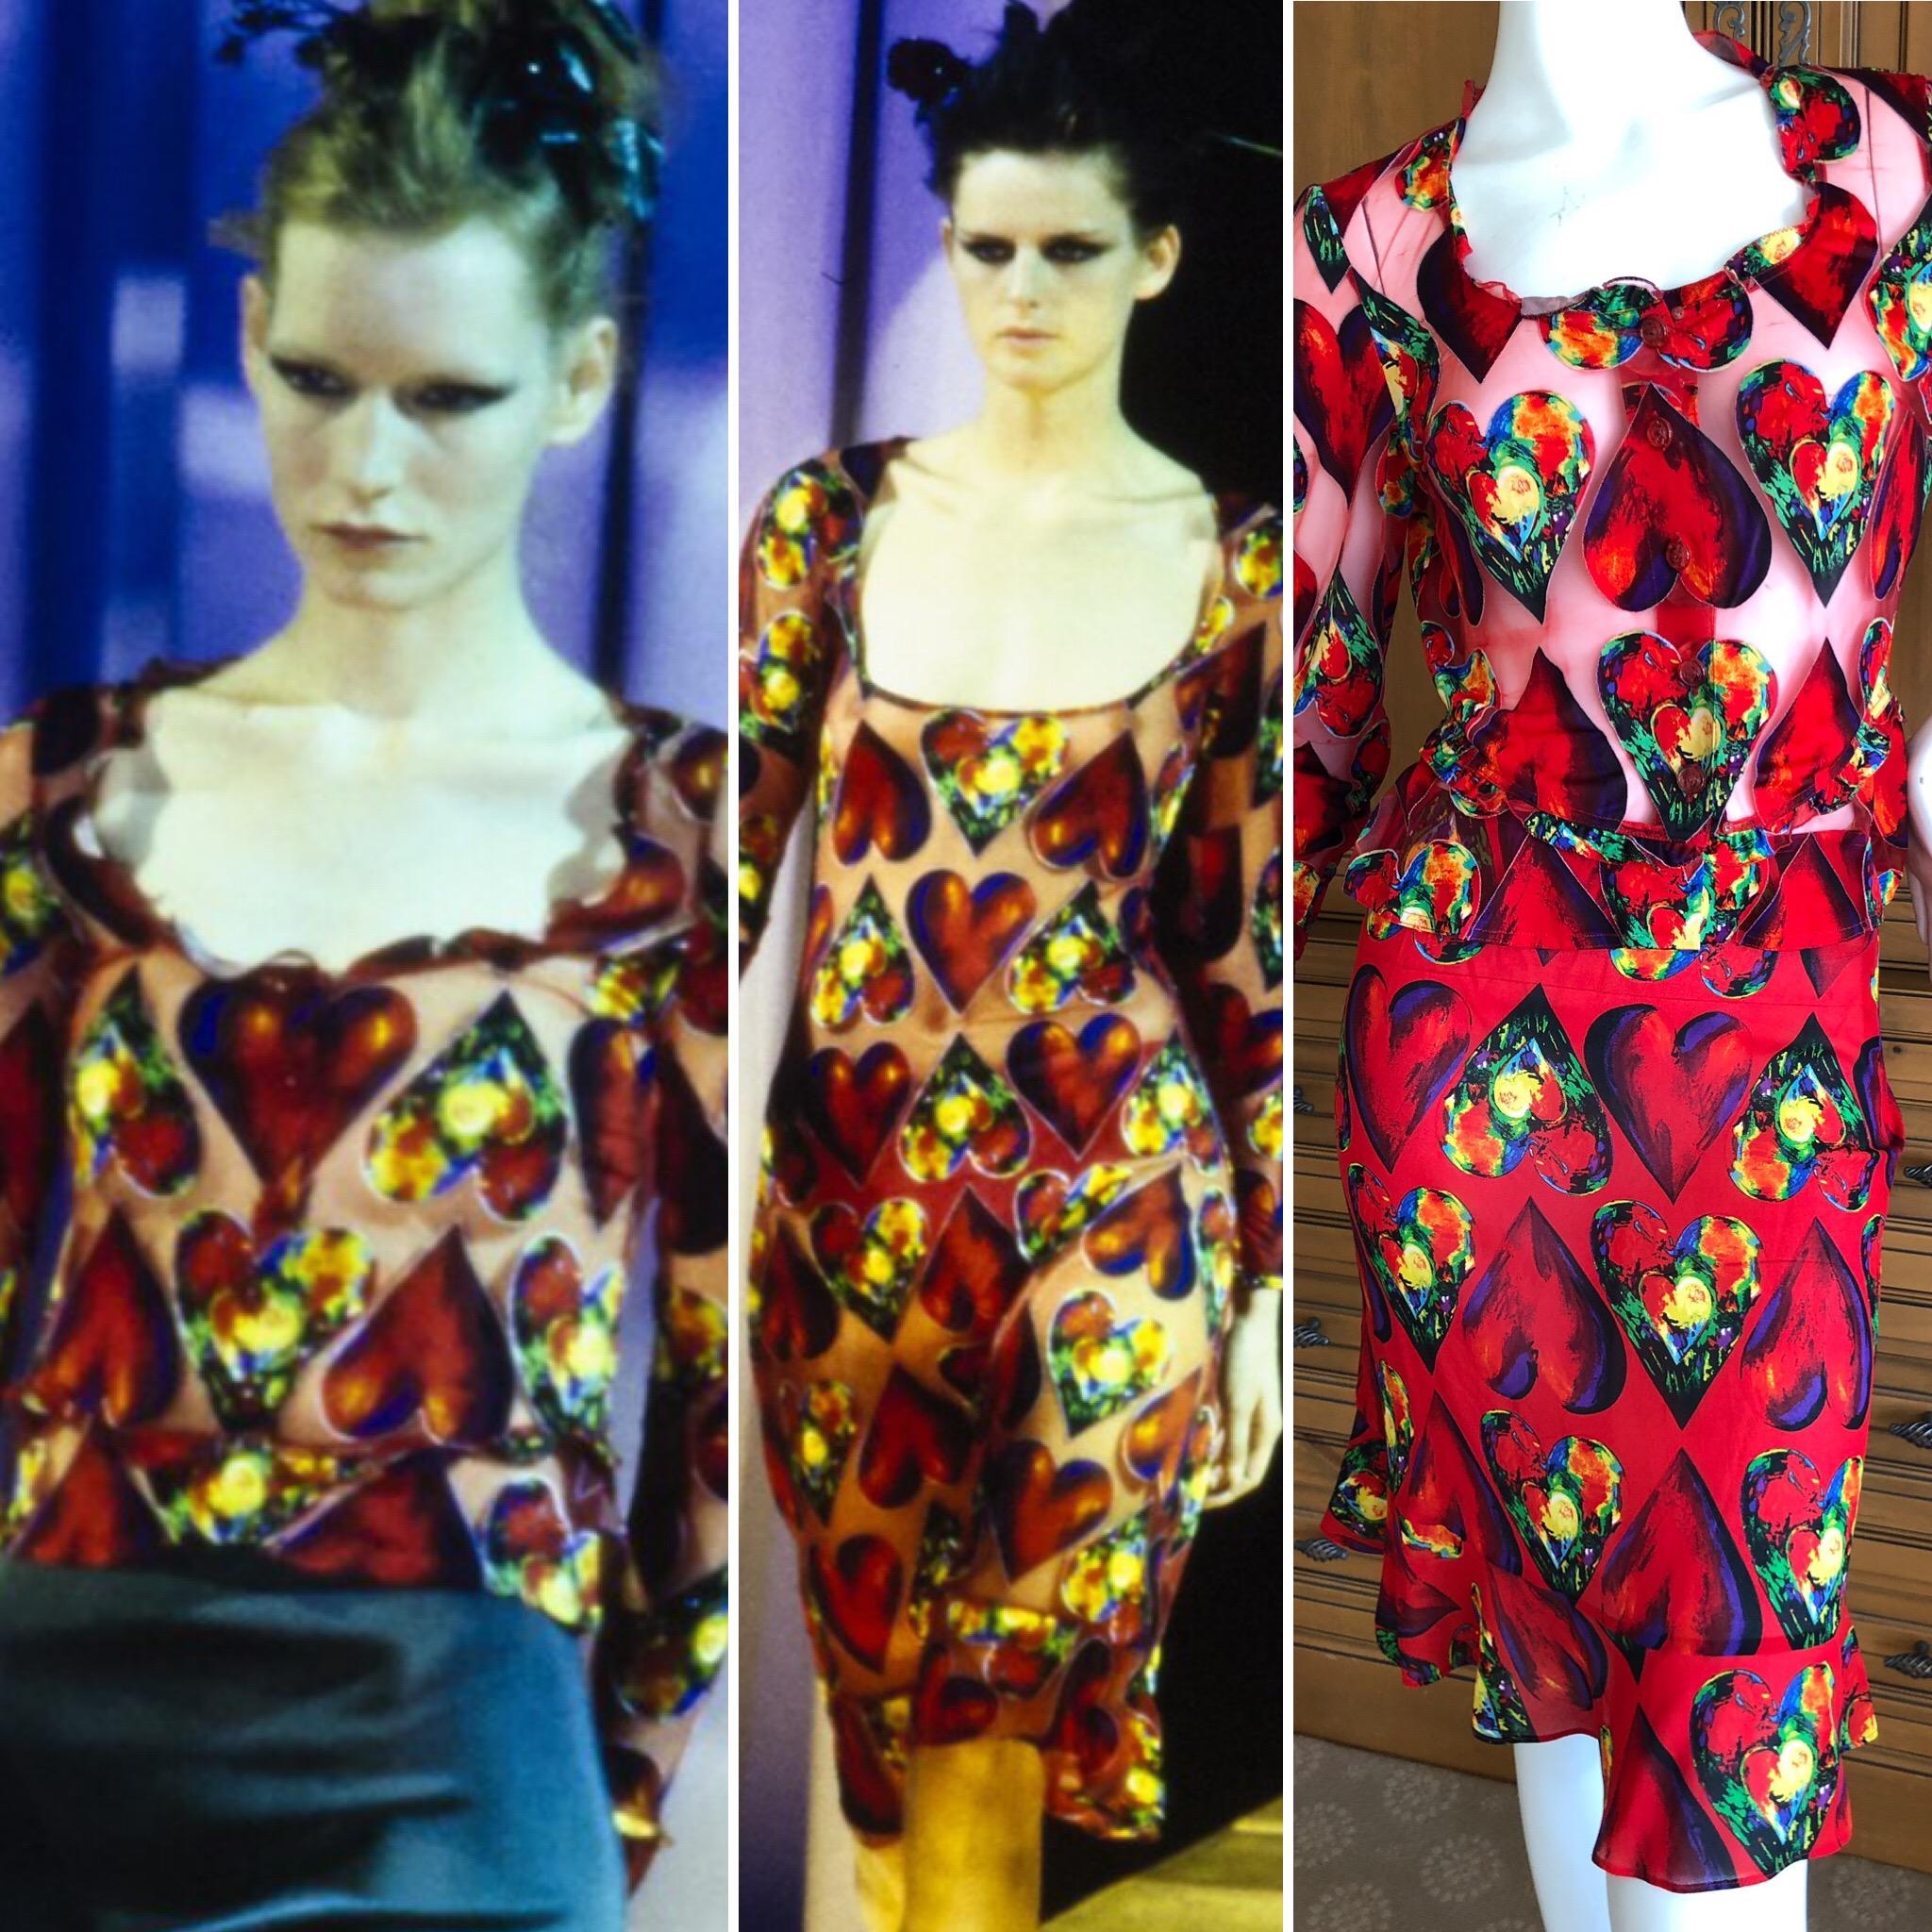 Gianni Versace Couture Spring 1997 Jim Dine Heart Print Sheer Skirt Suit.
Sheer top with silk chiffon skirt, from the Spring 197 Gianni Versace collection.
Size 38.
In Excellent Condition.
Bust 38